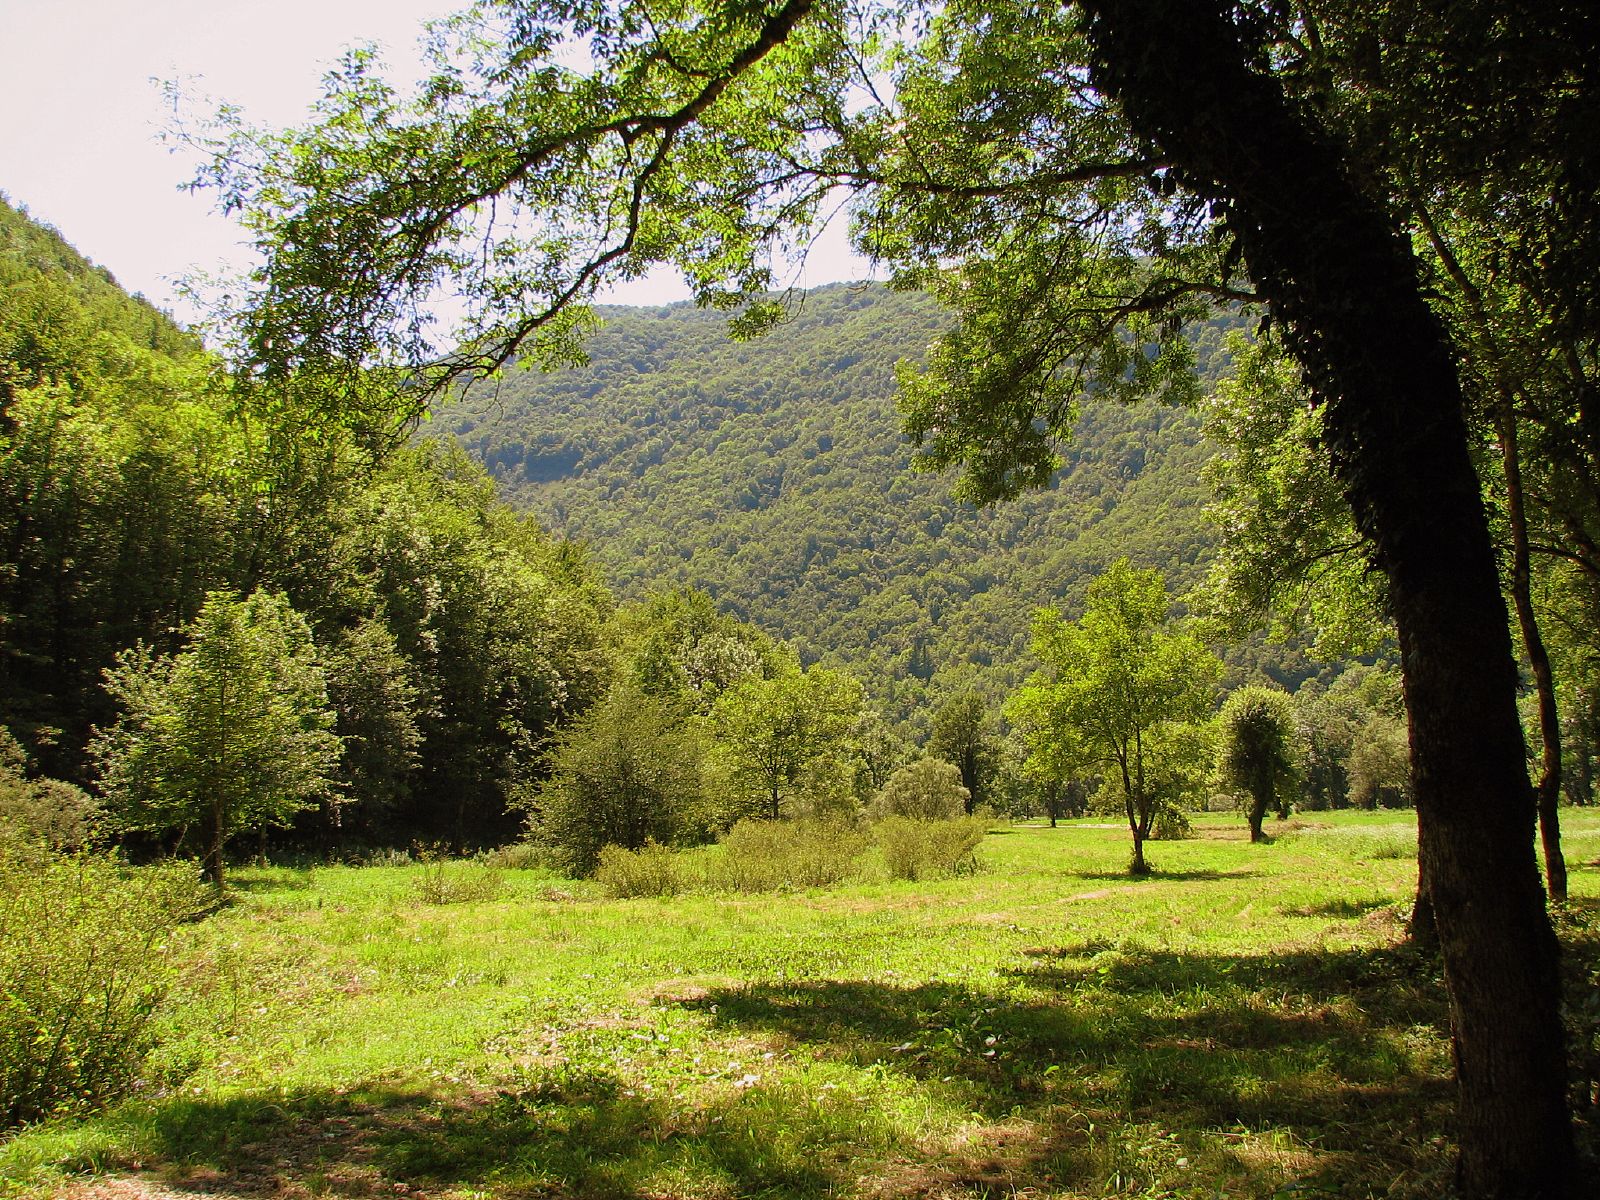 a grassy, wooded area with trees and hills in the background